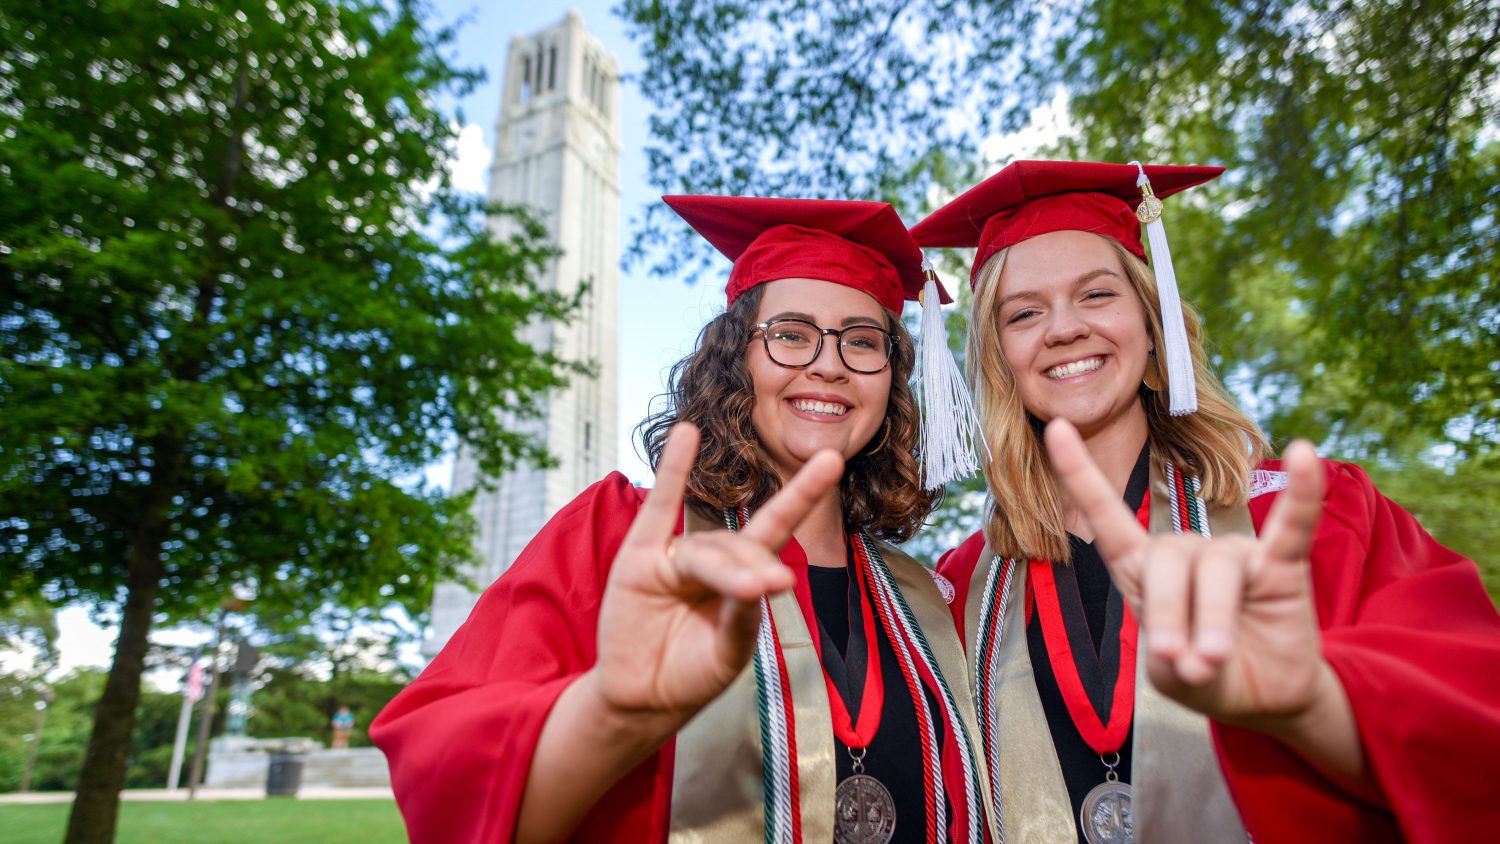 Cashie Naylor and Emily Fletcher in their caps and gowns in front of the Belltower